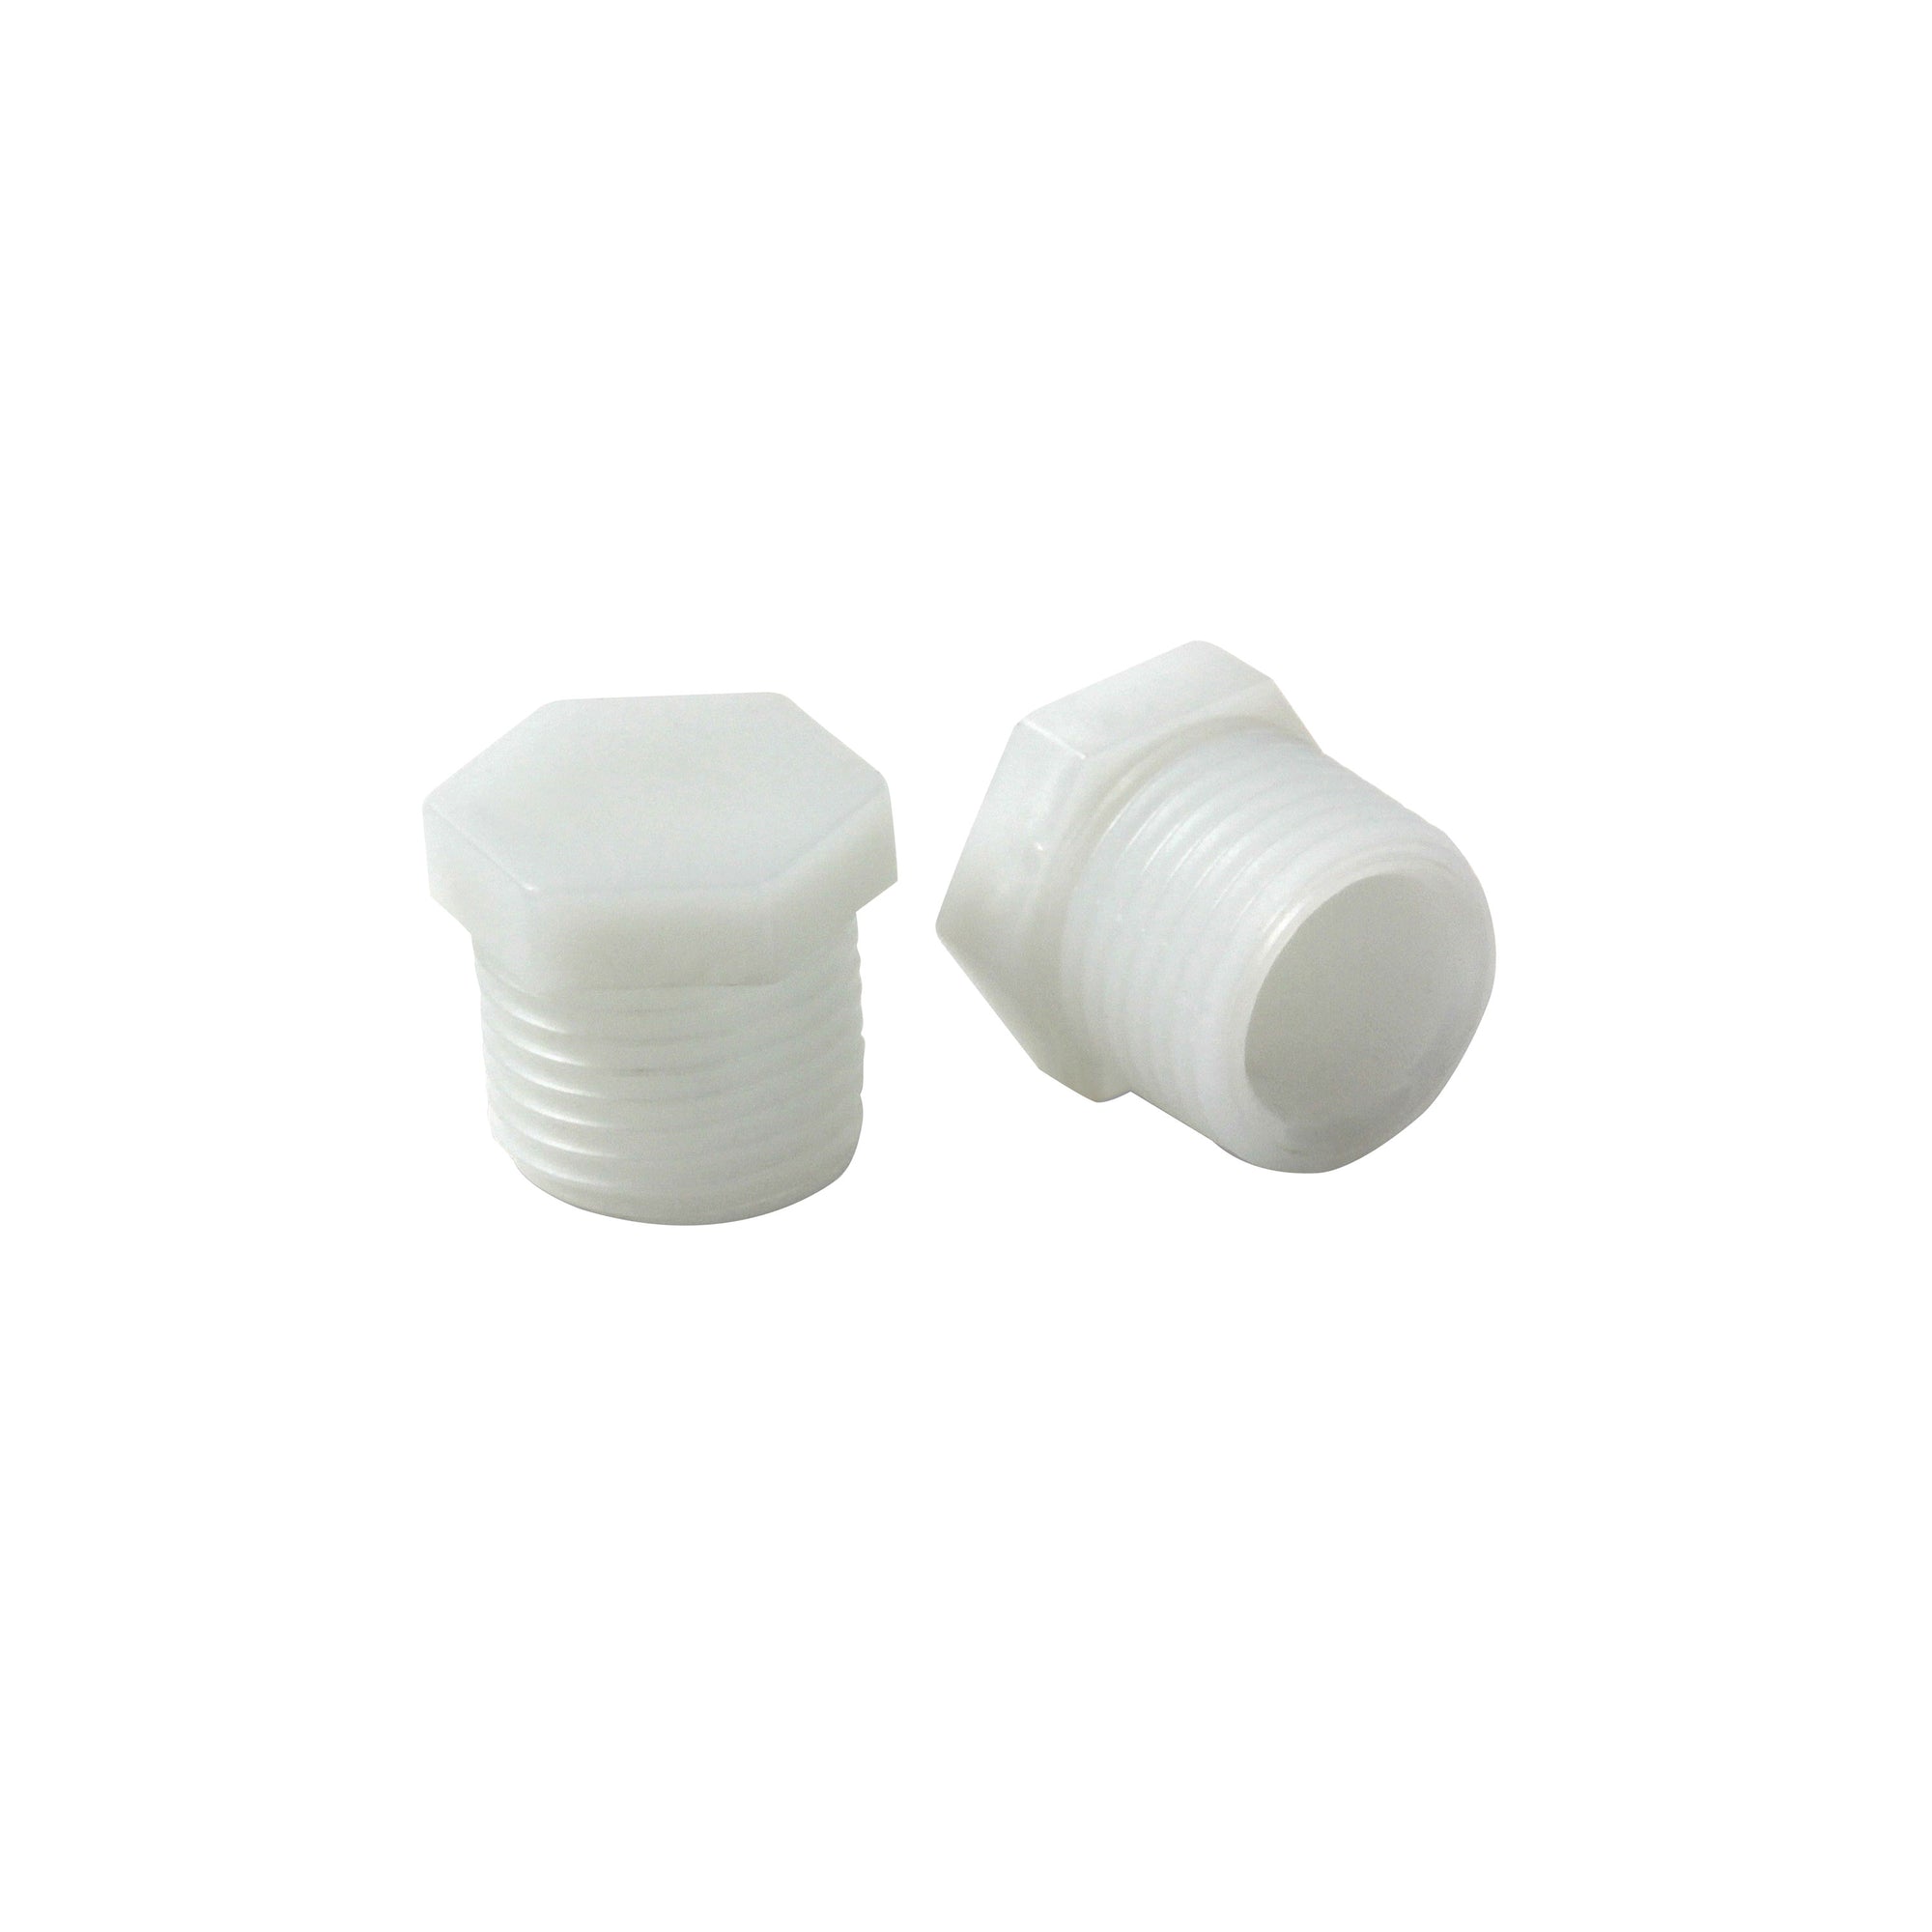 Camco 11630 1/2" Water Heater Drain Plug - Pack Of 2